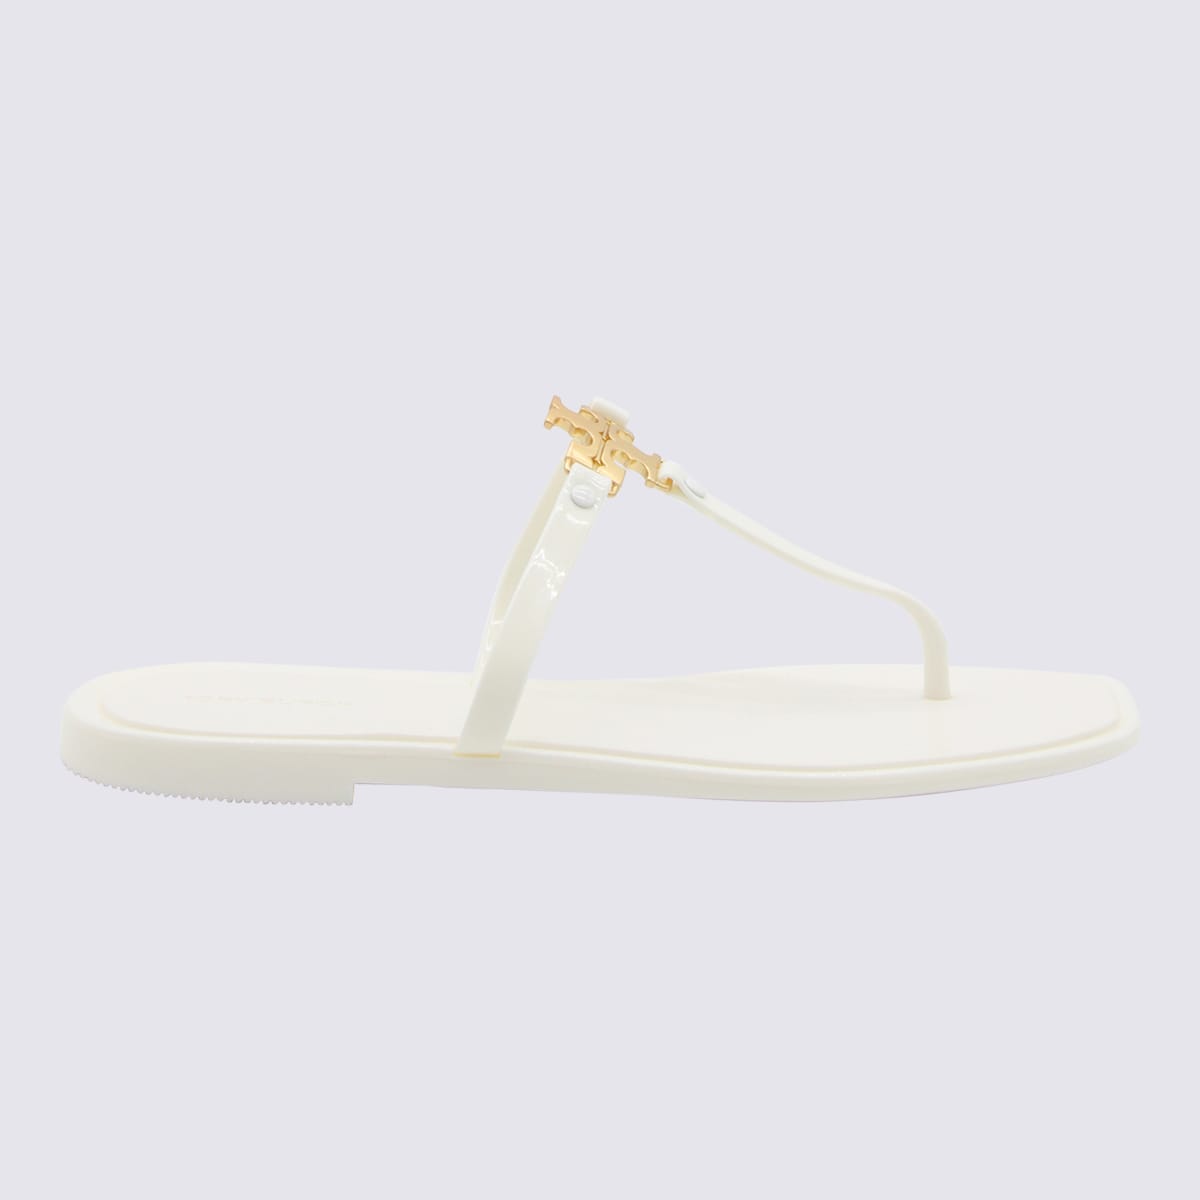 TORY BURCH IVORY AND GOLD RUBBER ROXANNE JELLY FLATS